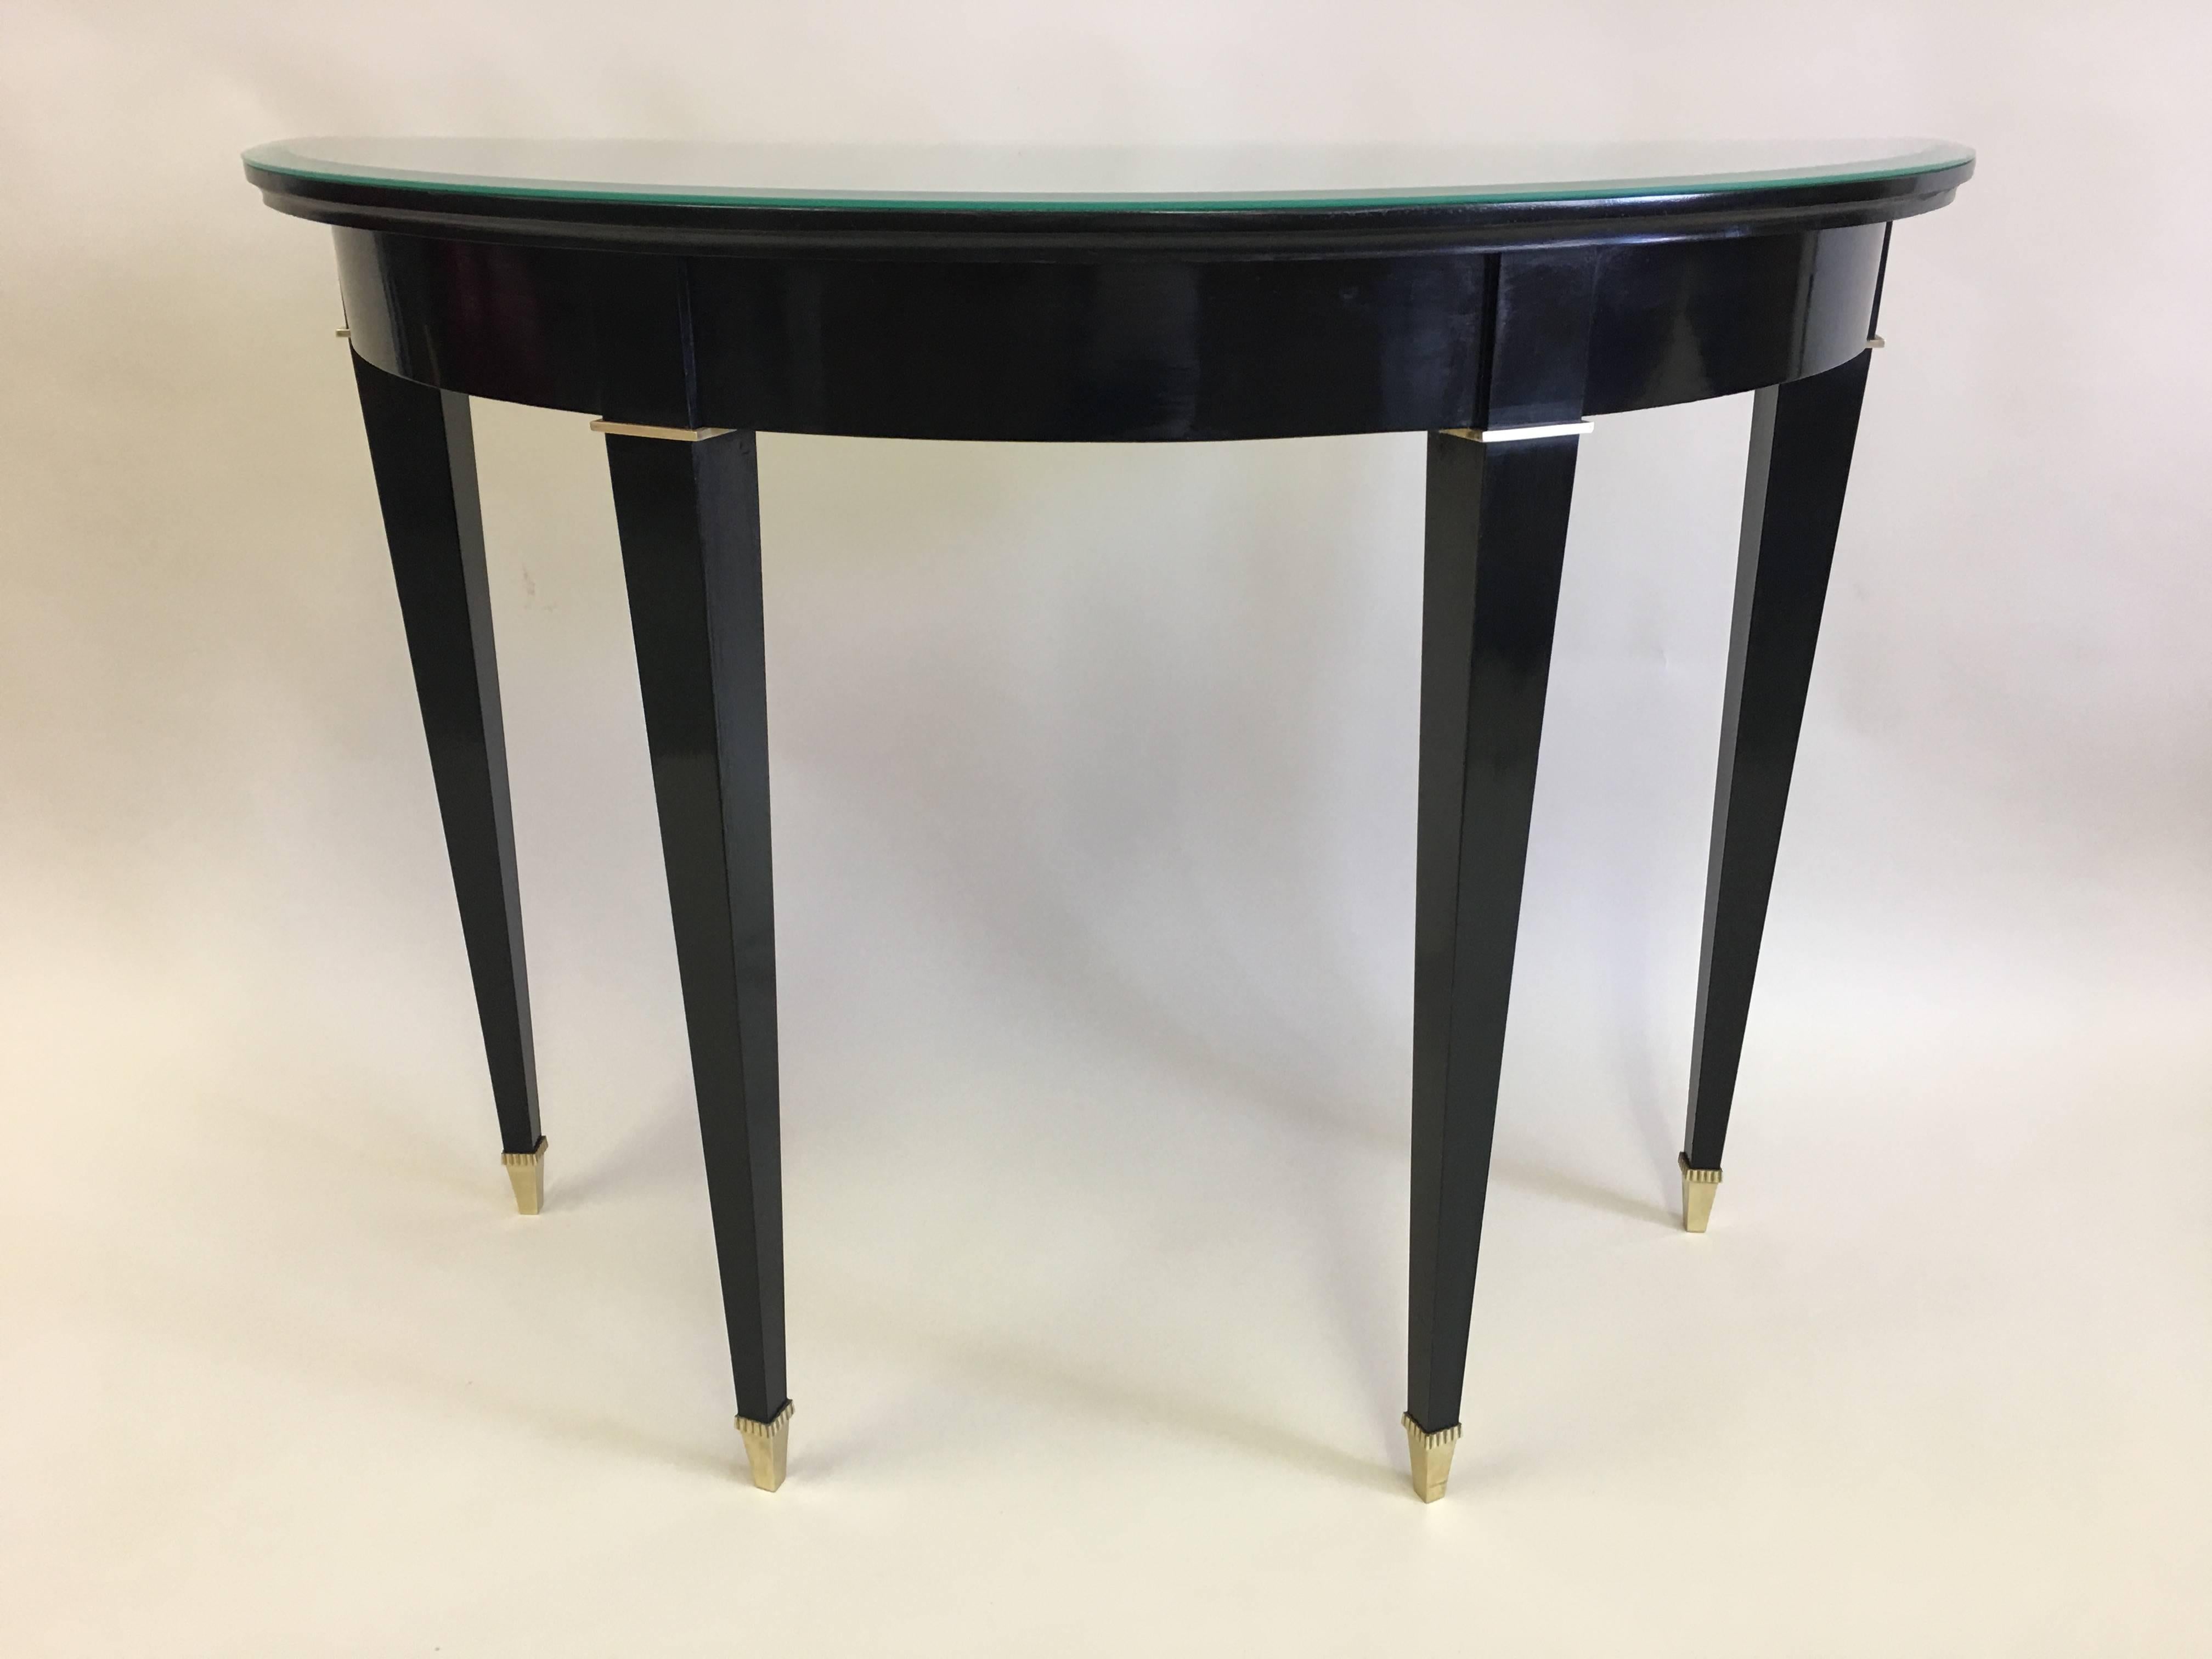 Mid-Century Modern French Modern Neoclassical Black Lacquer Demilune Console Attr. to Andre Arbus For Sale